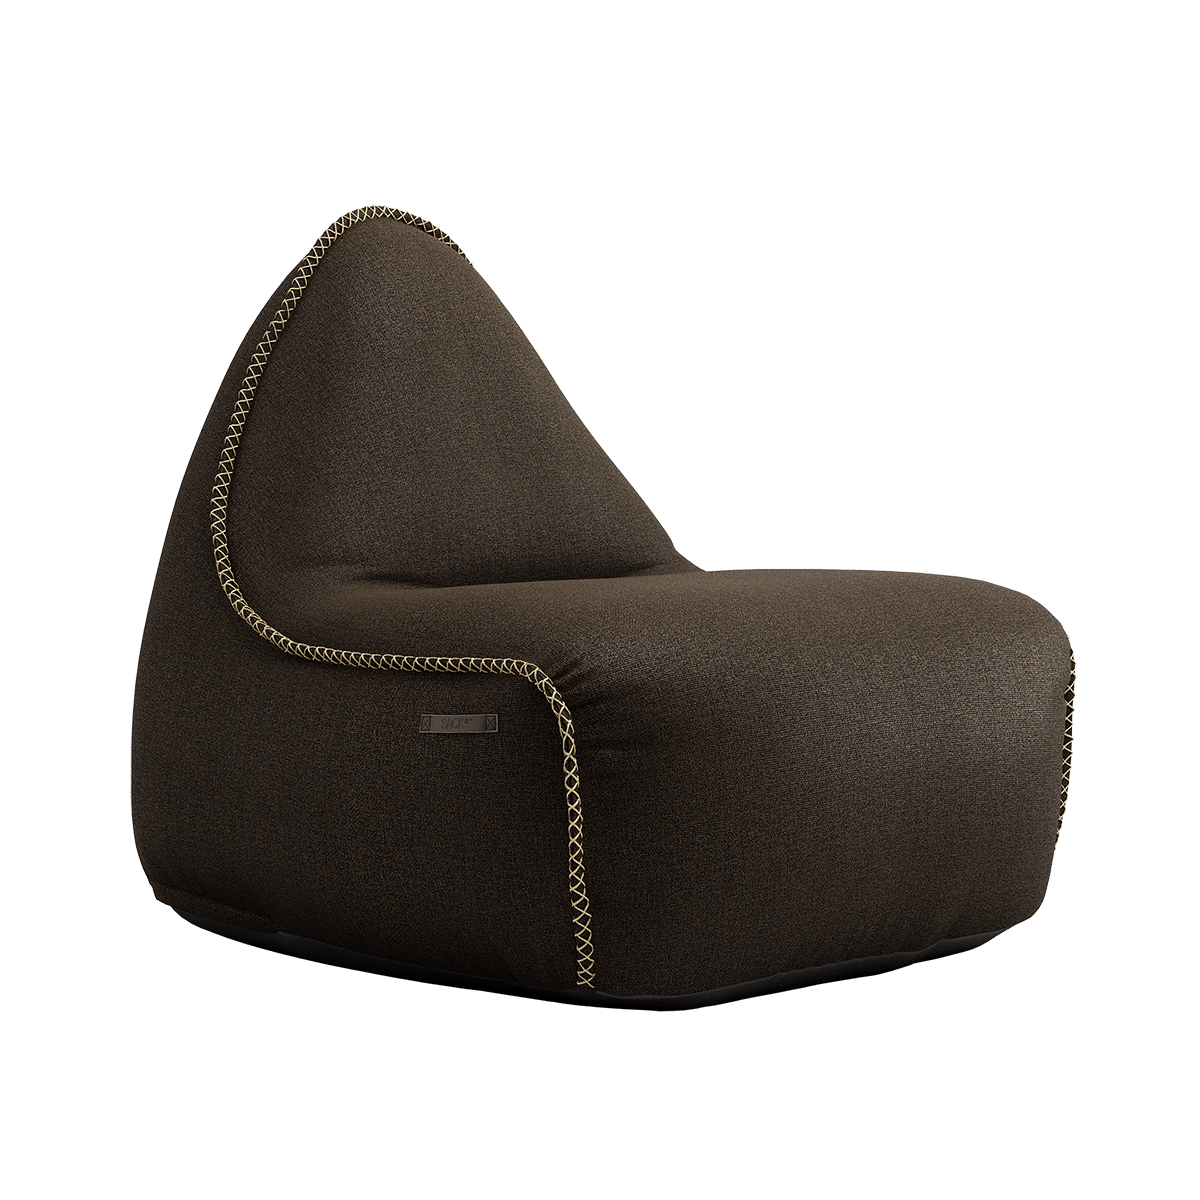 variant_8567005% | Medley Lounge Chair [Contract] - Medley Coffee | SACKit